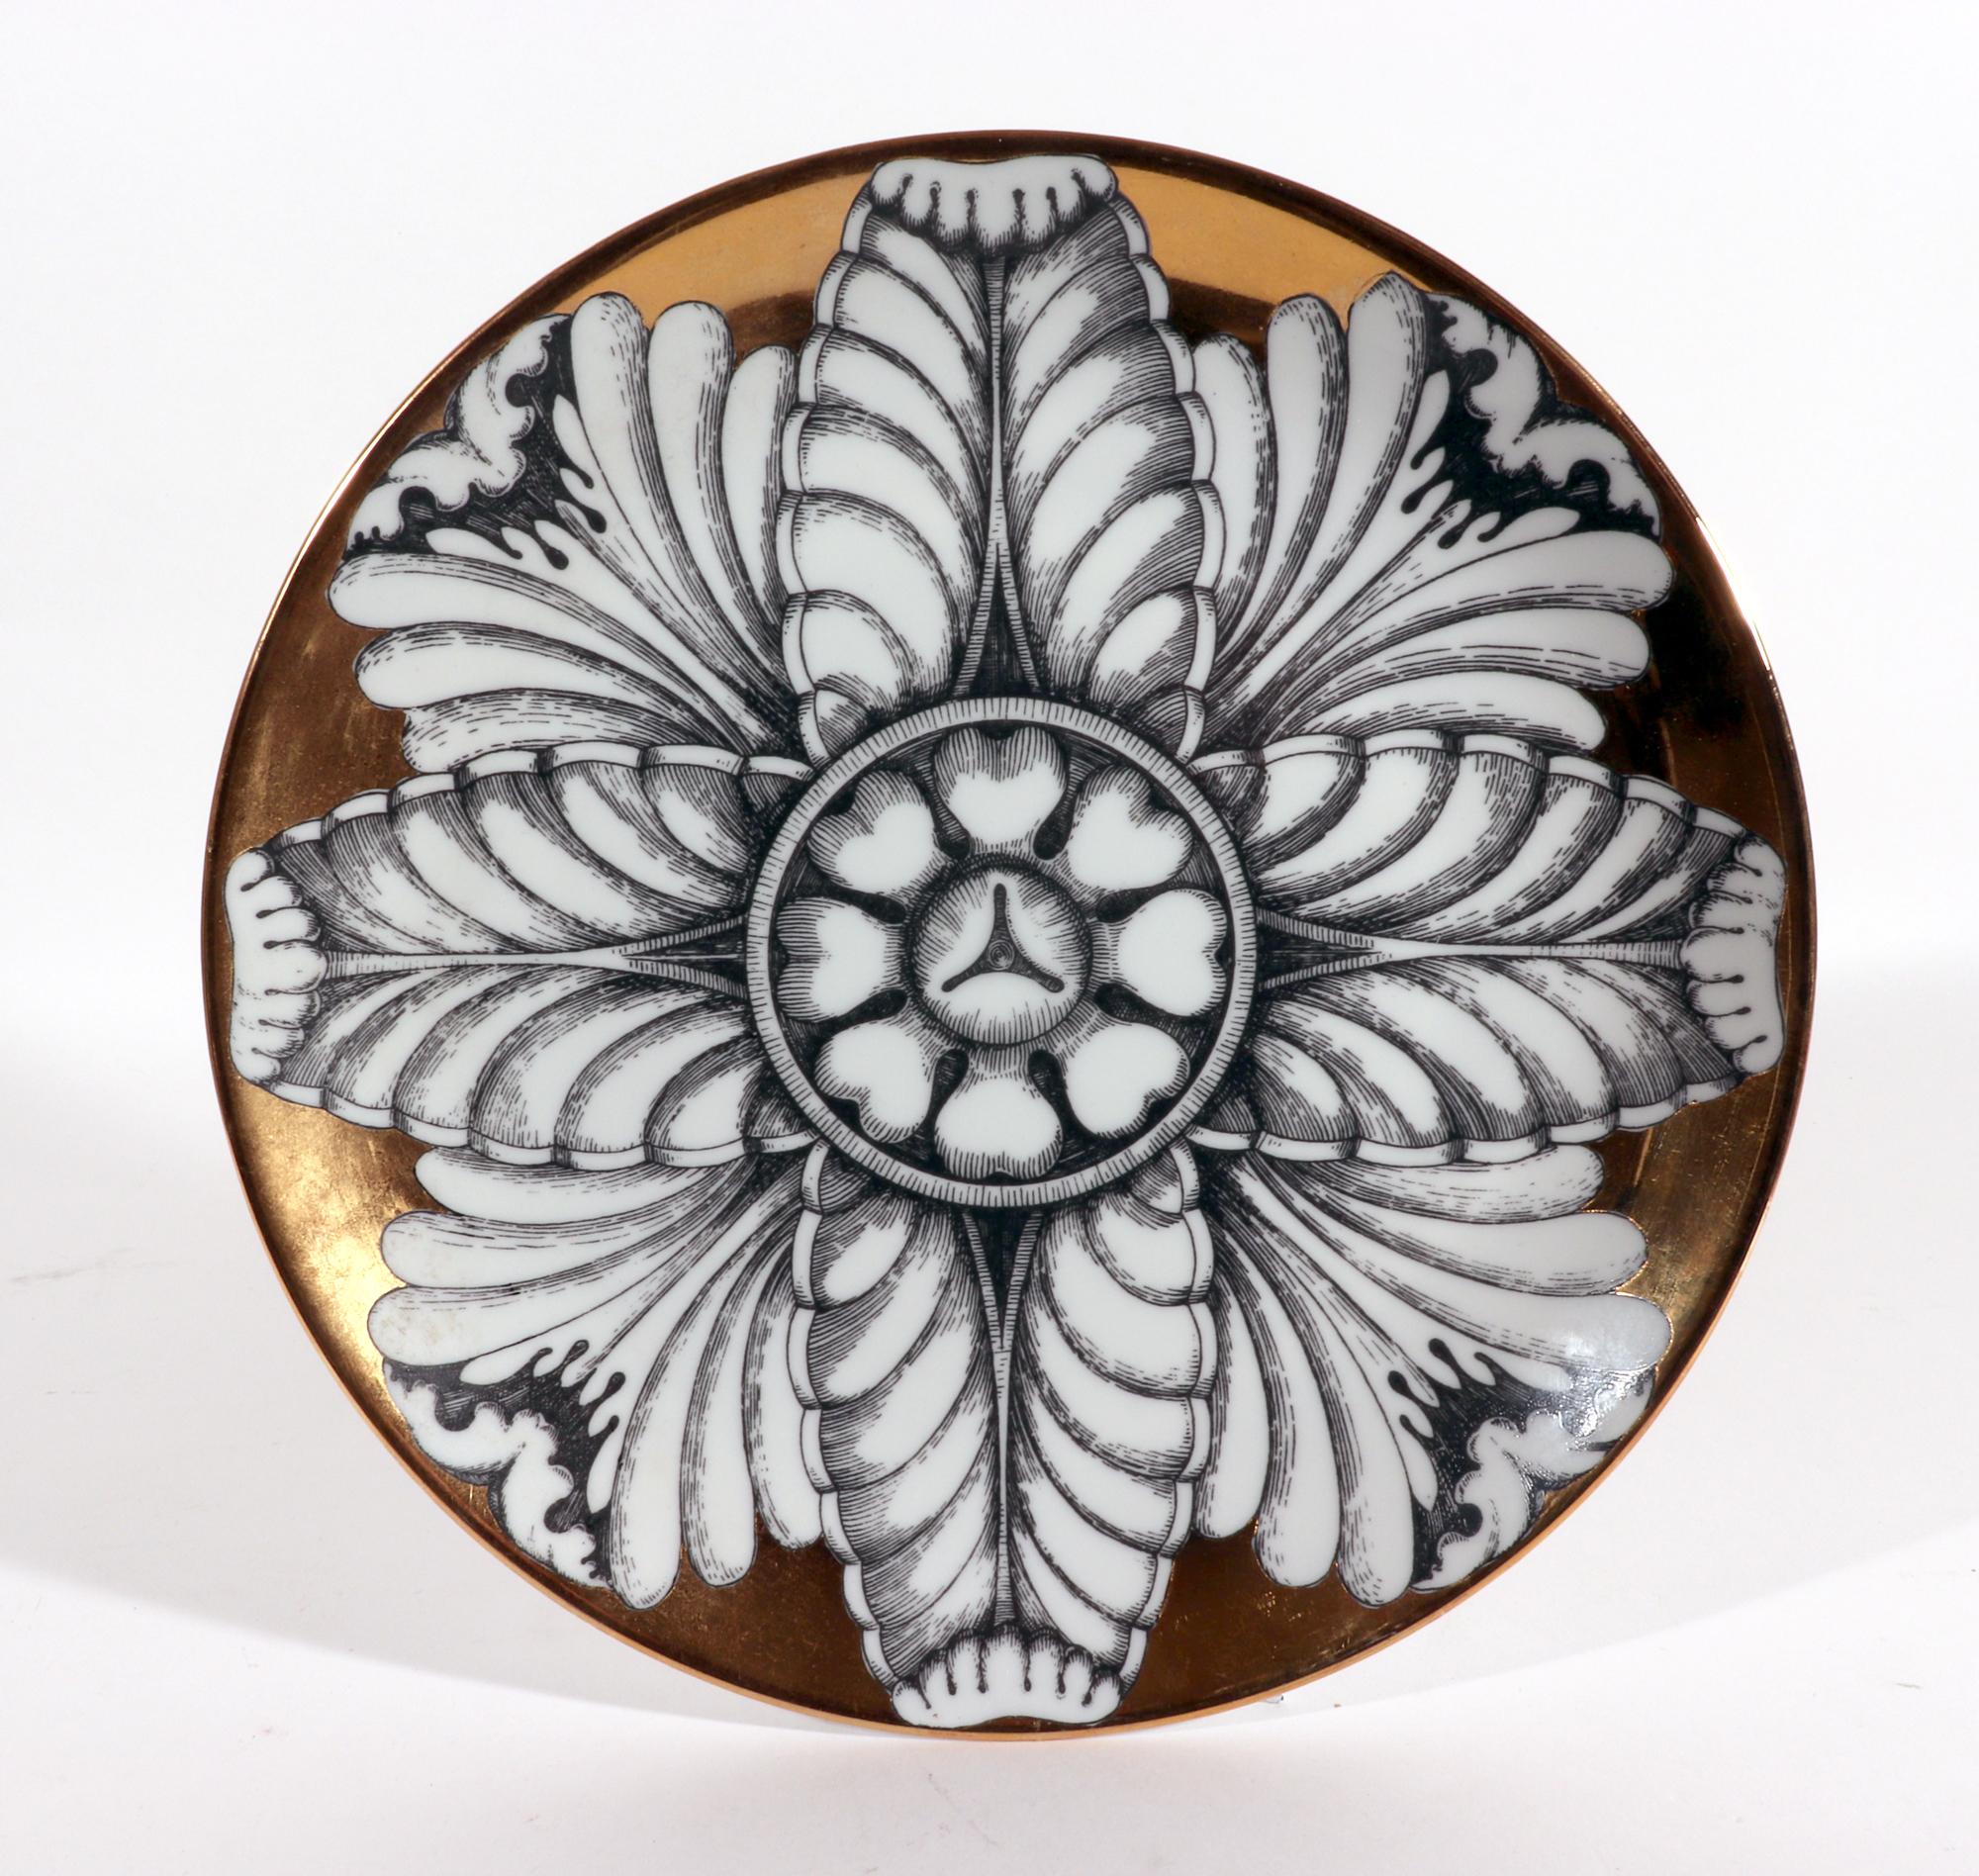 Vintage Set of Six Piero Fornasetti Porcelain Rosoni pattern plates depicting Rosettes
1980s,

The dramatic plates depict six different large black and white flower-shaped rosettes on a gilt ground. 

Dimensions: 10 inches diameter x 1 1/4